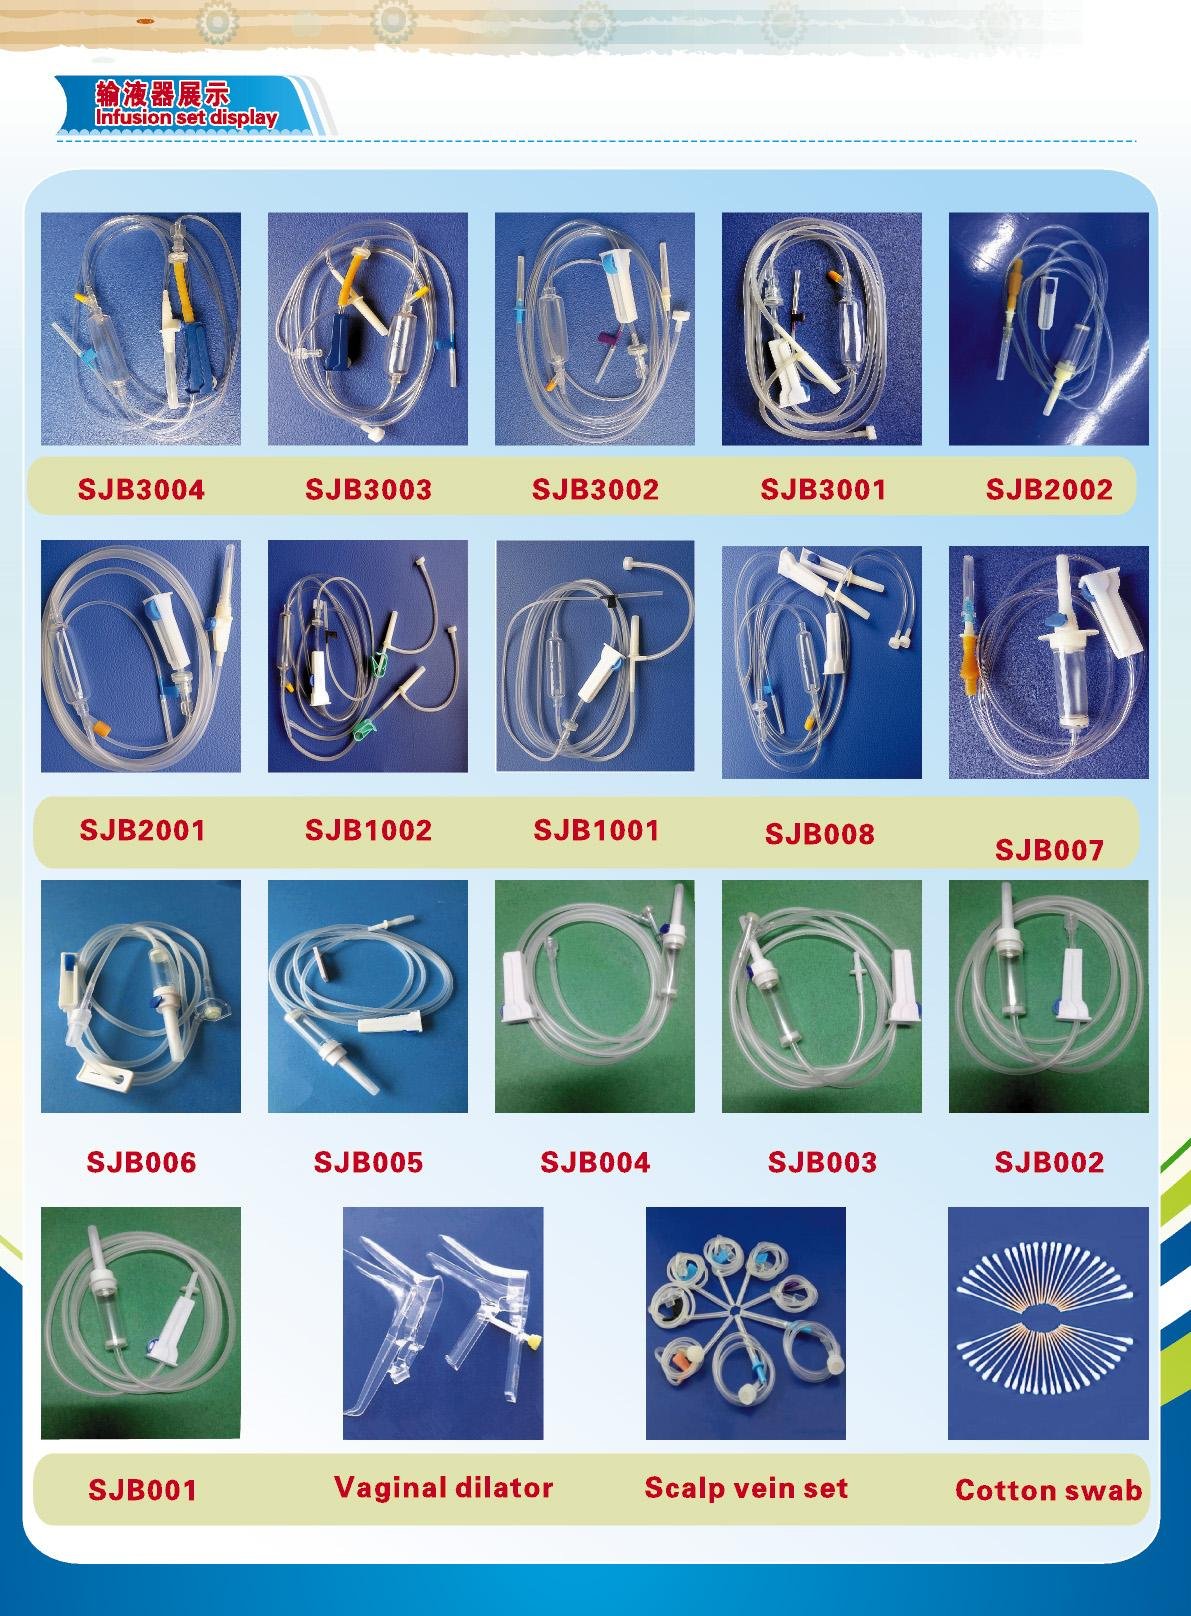 SJB007 Disposable Infusion Set 2